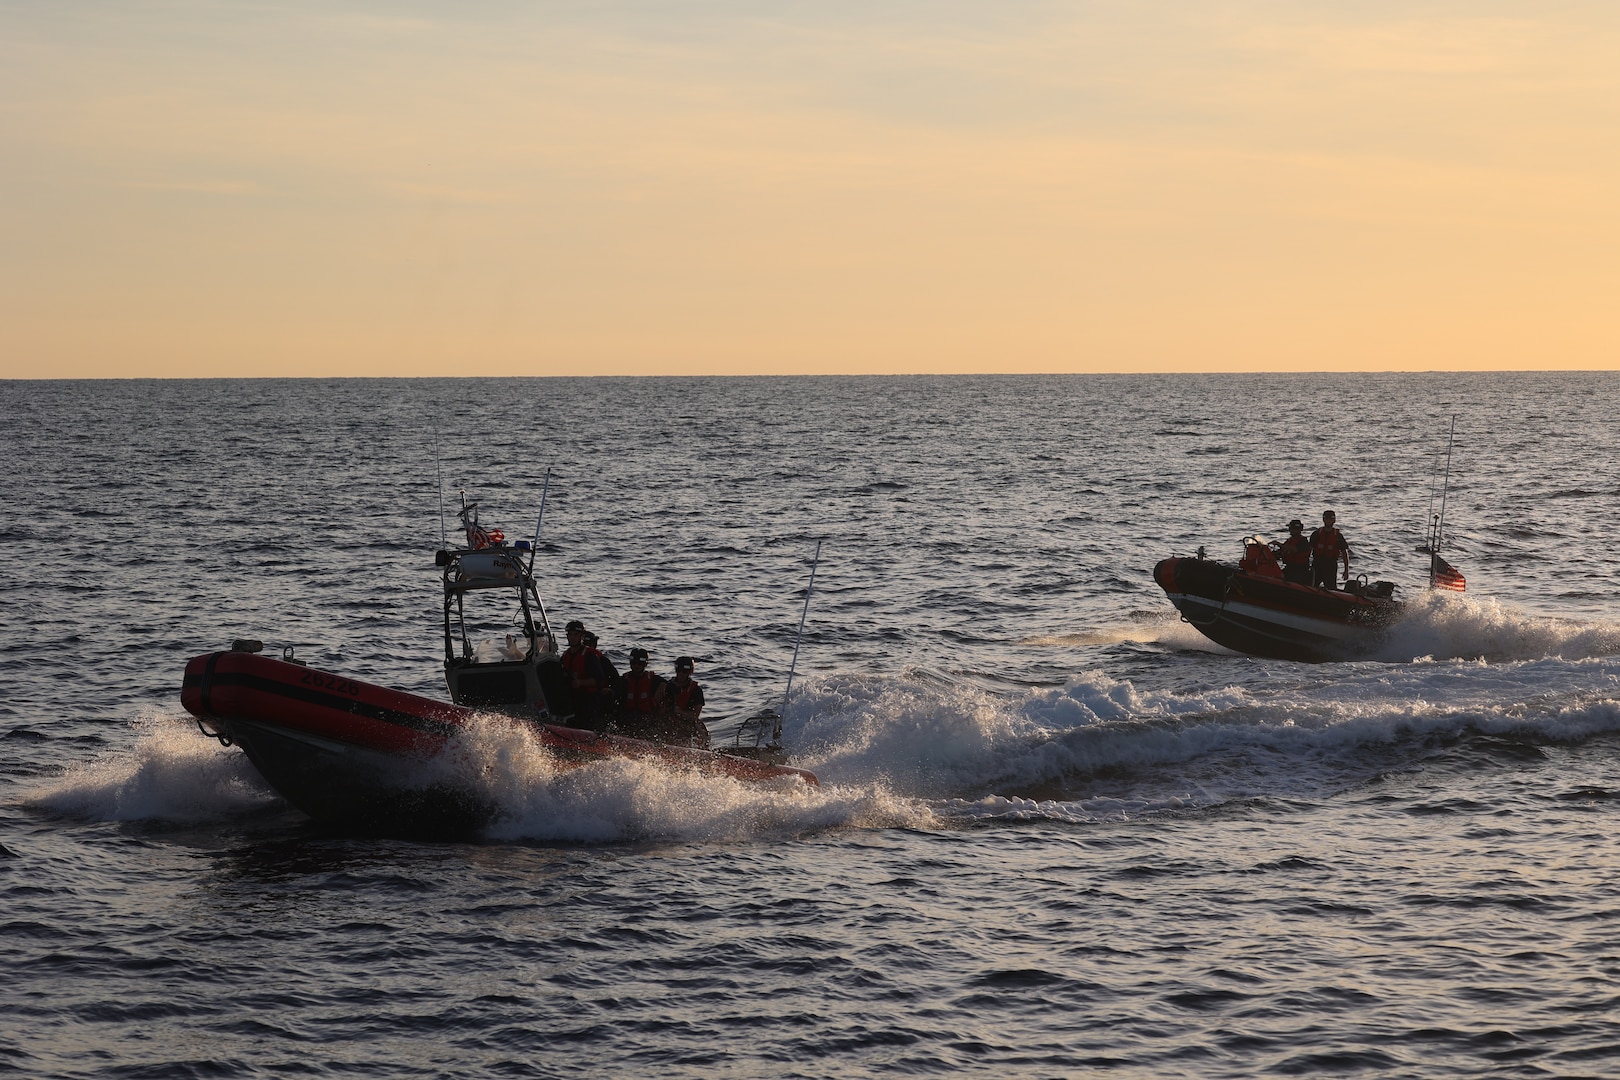 The crew of the U.S. Coast Guard Cutter Tahoma (WMEC 908) conducts interdiction operations with the cutter’s small boats in the Florida Straits, Nov. 6, 2023. Tahoma deployed for a 65-day patrol and conducted maritime safety and security missions while supporting Homeland Security Task Force – Southeast.